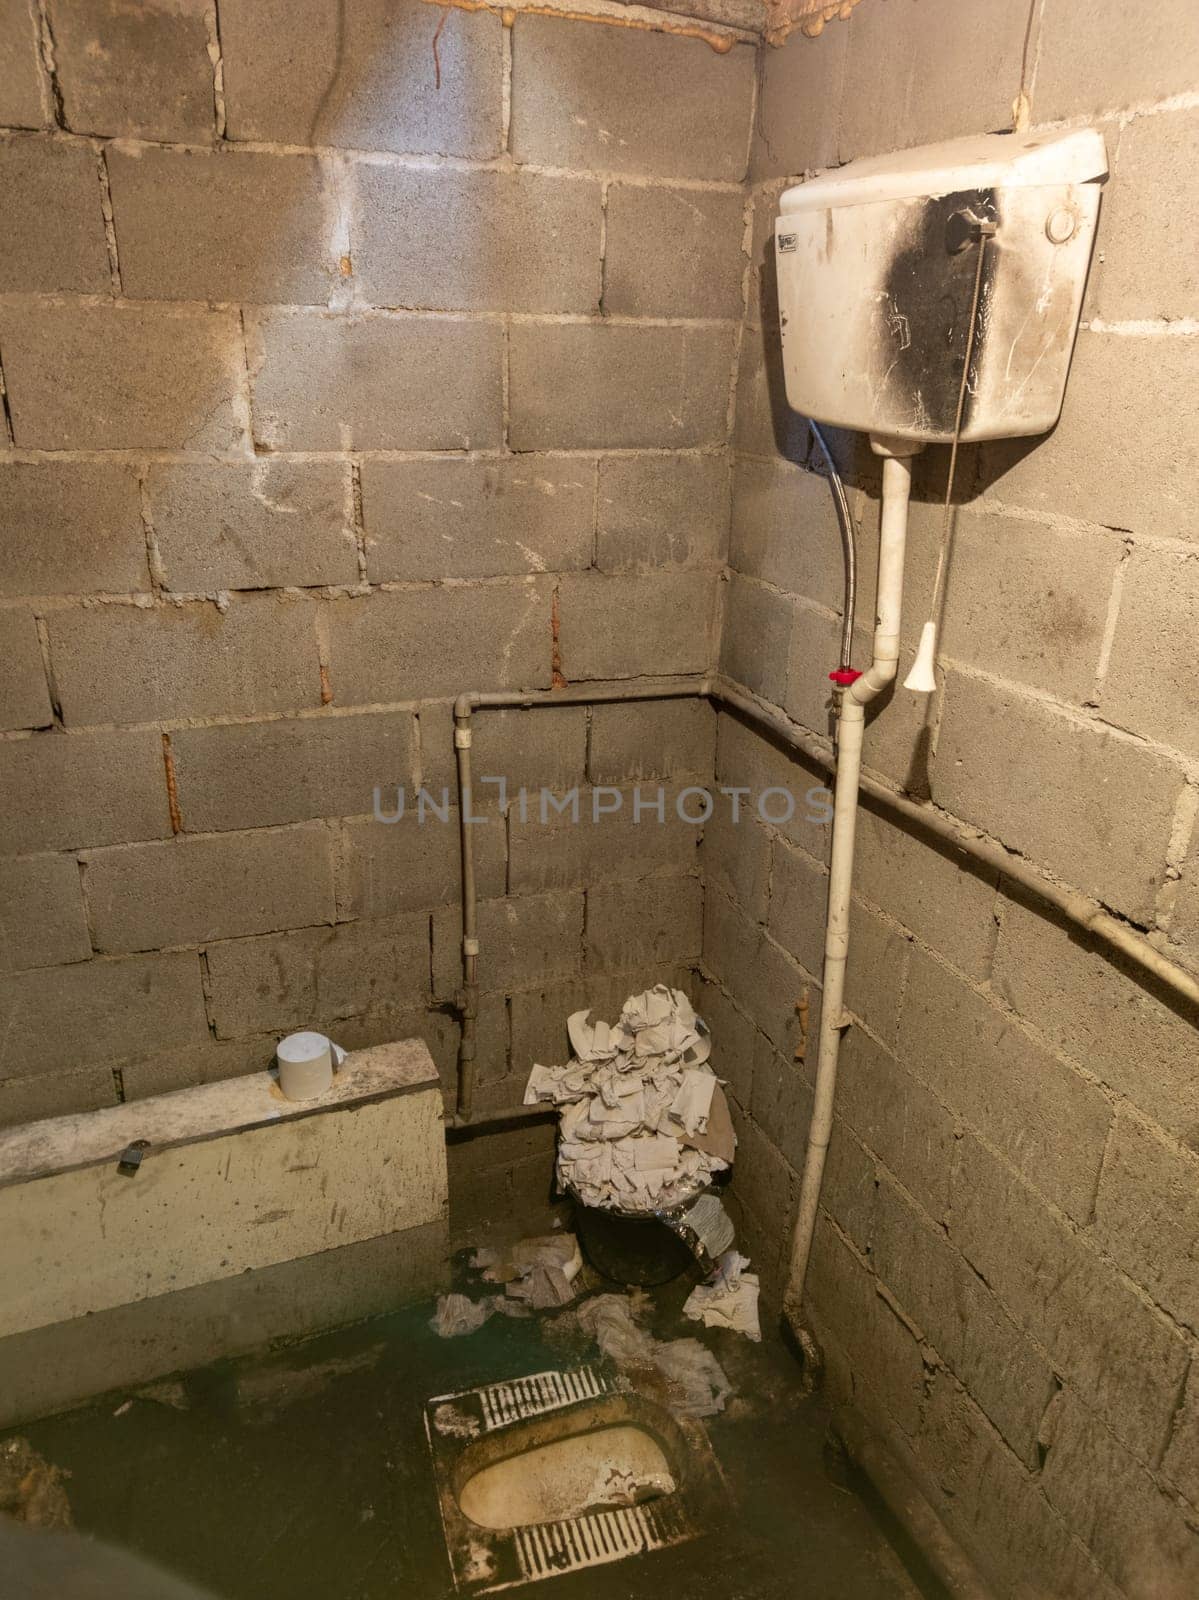 Dirty toilet room with pile of used toilet paper in the corner, uncoated concrete flooring and cinder brick walls. by z1b